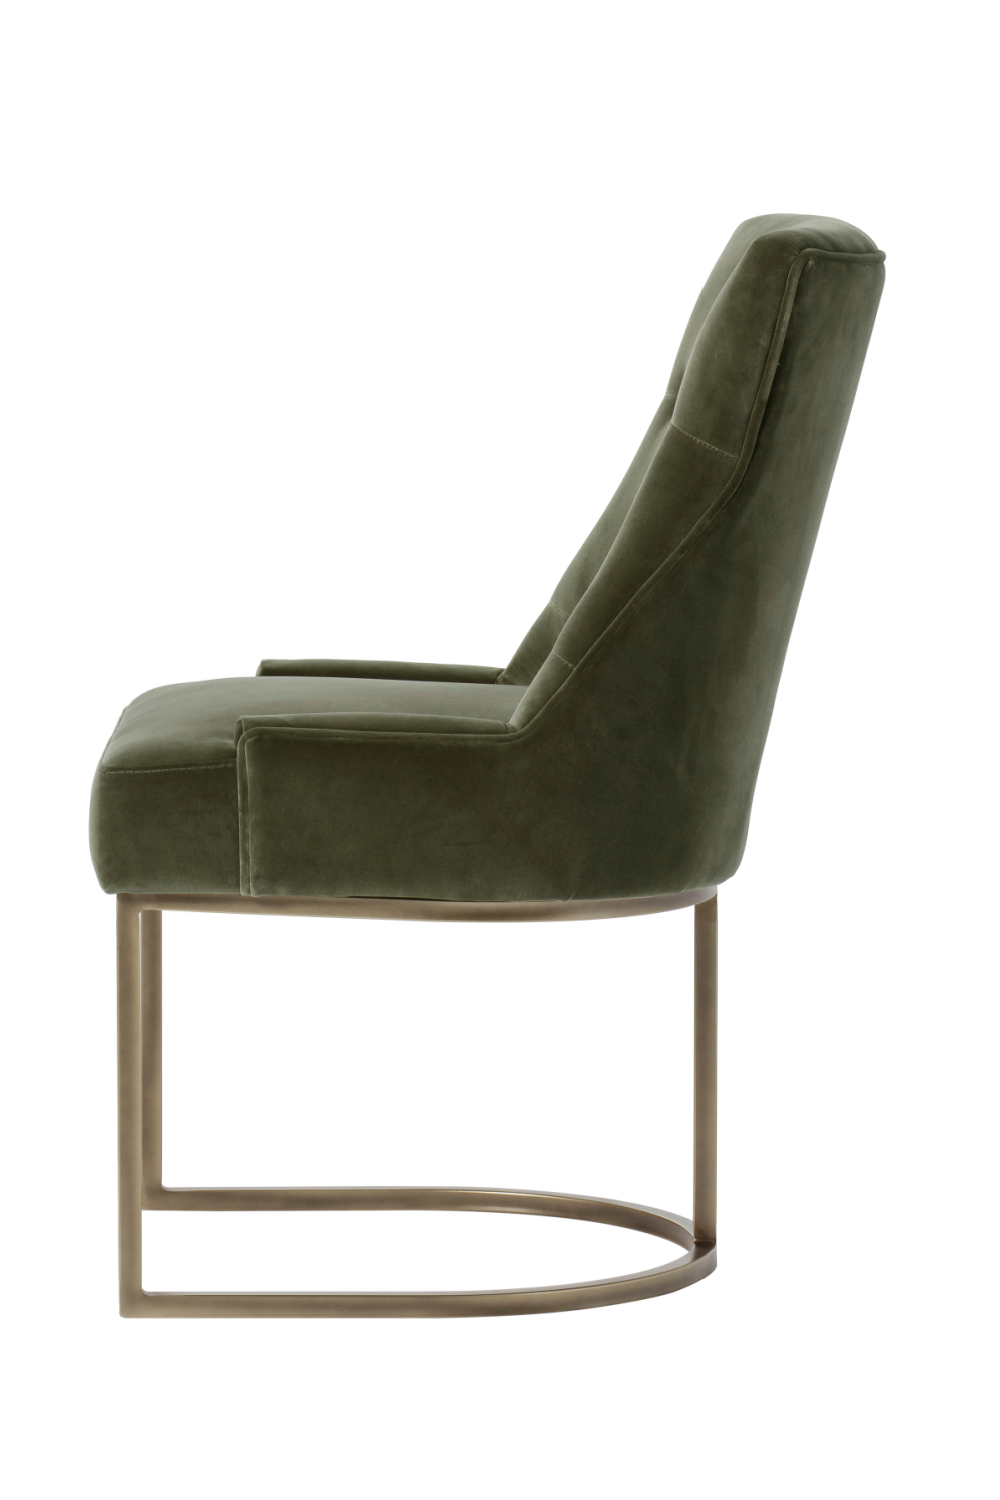 Aged Green Tufted Dining Chair | Andrew Martin Rupert | OROA